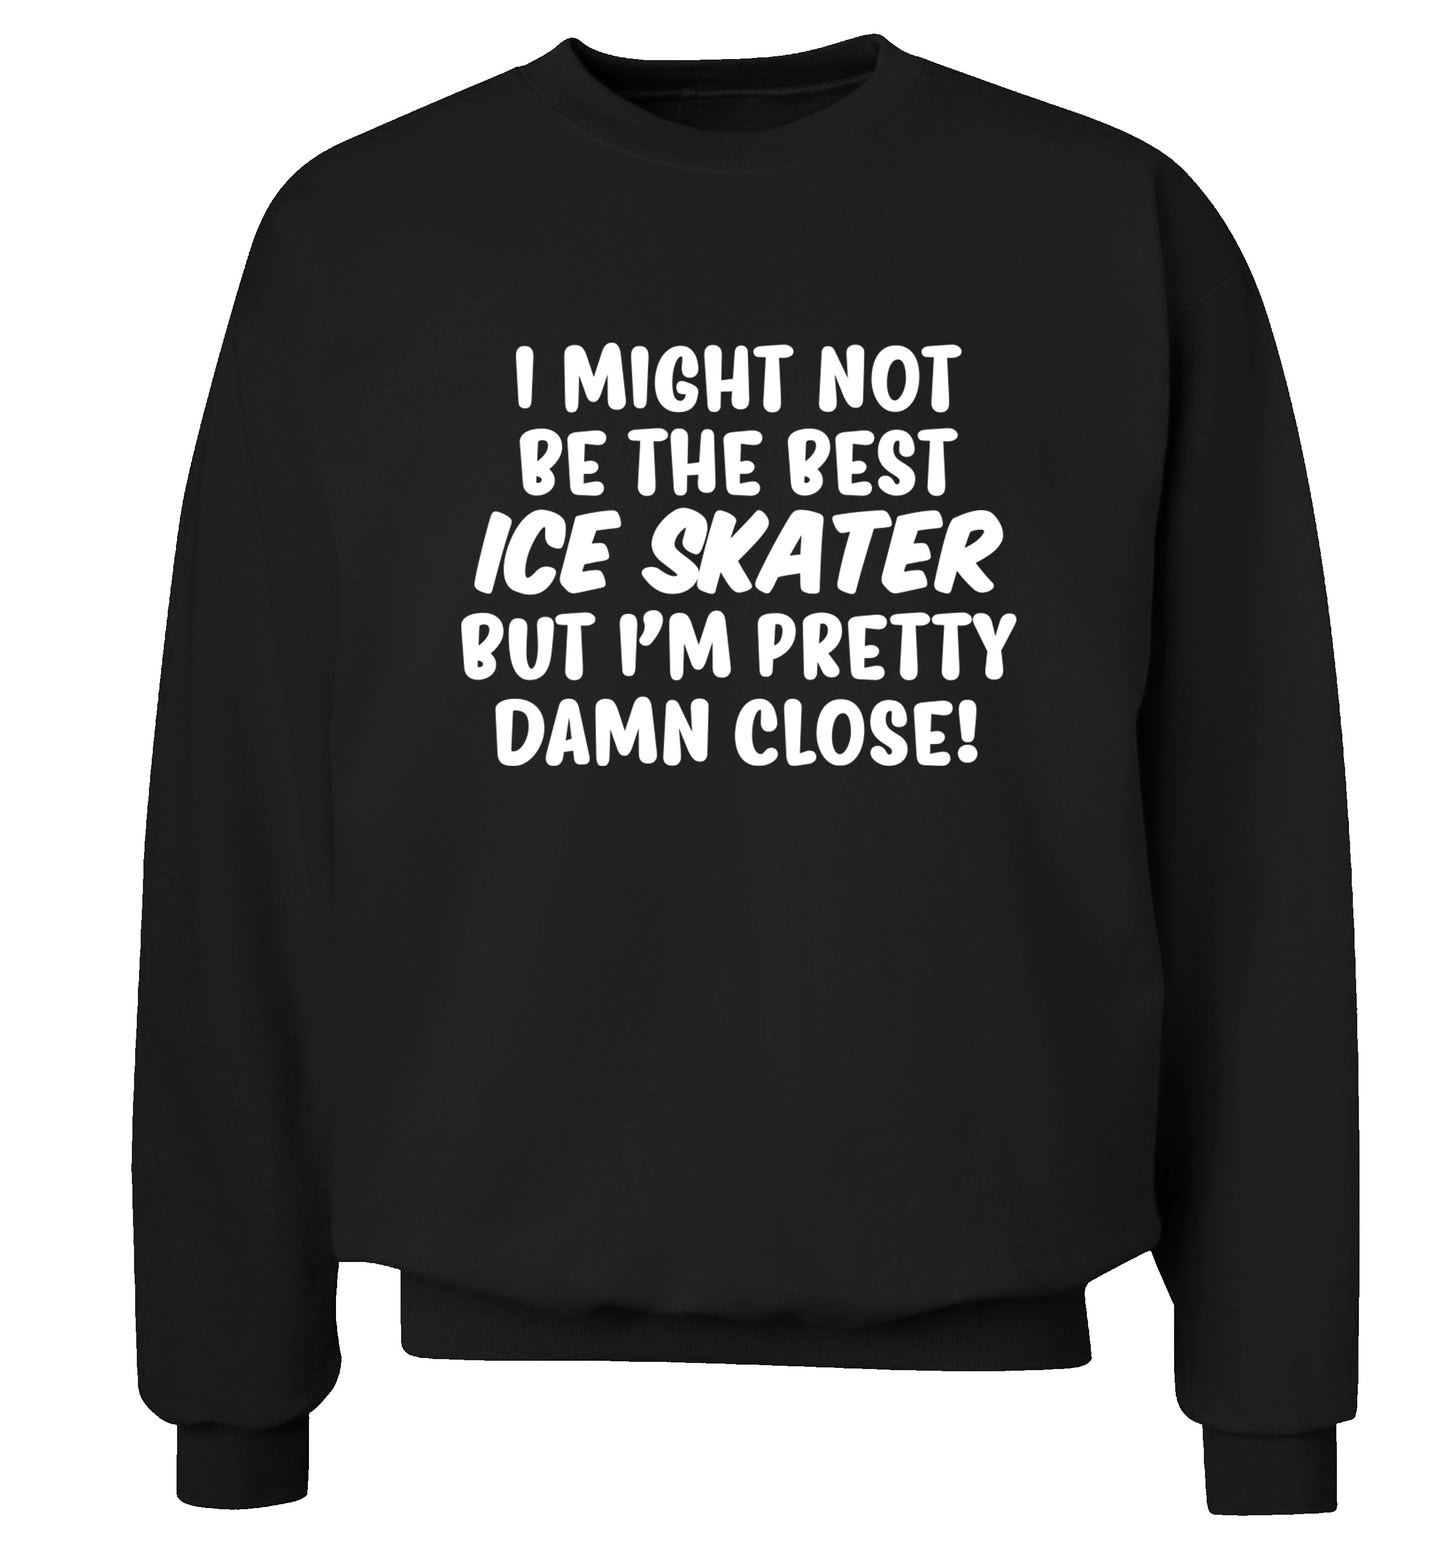 I might not be the best ice skater but I'm pretty damn close! Adult's unisexblack Sweater 2XL